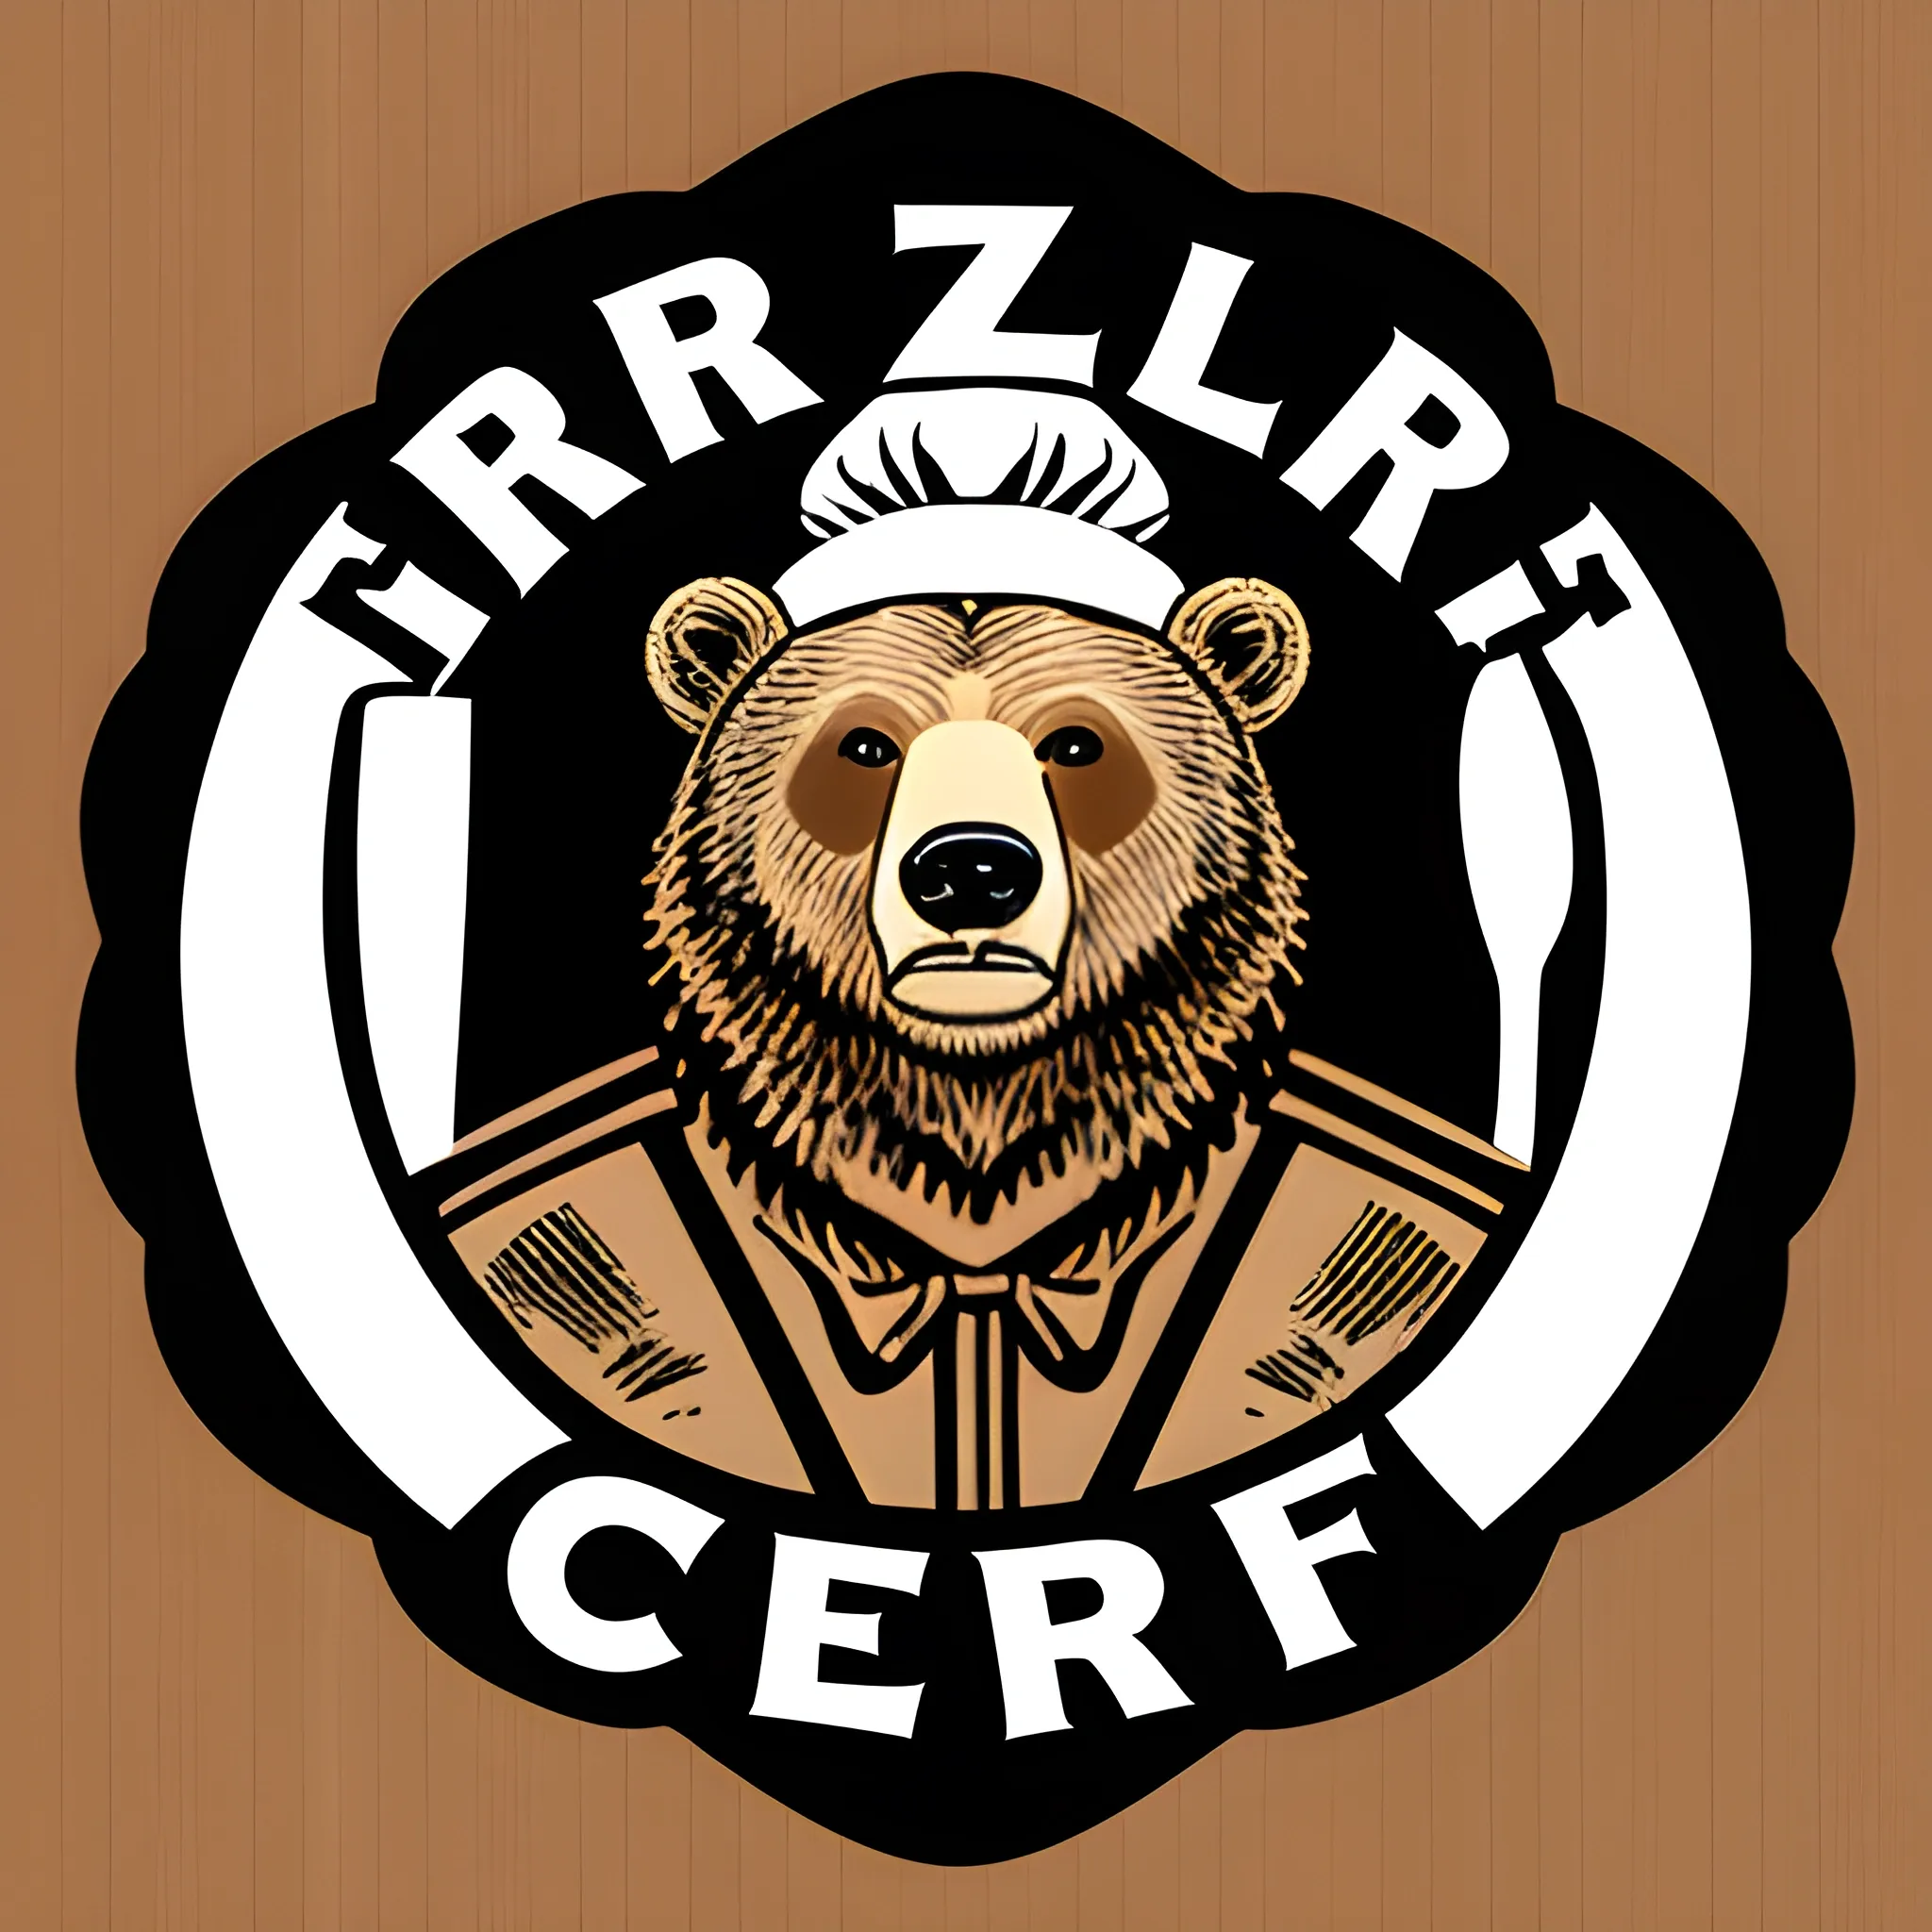 grizzly bear with chef hat logo no letters